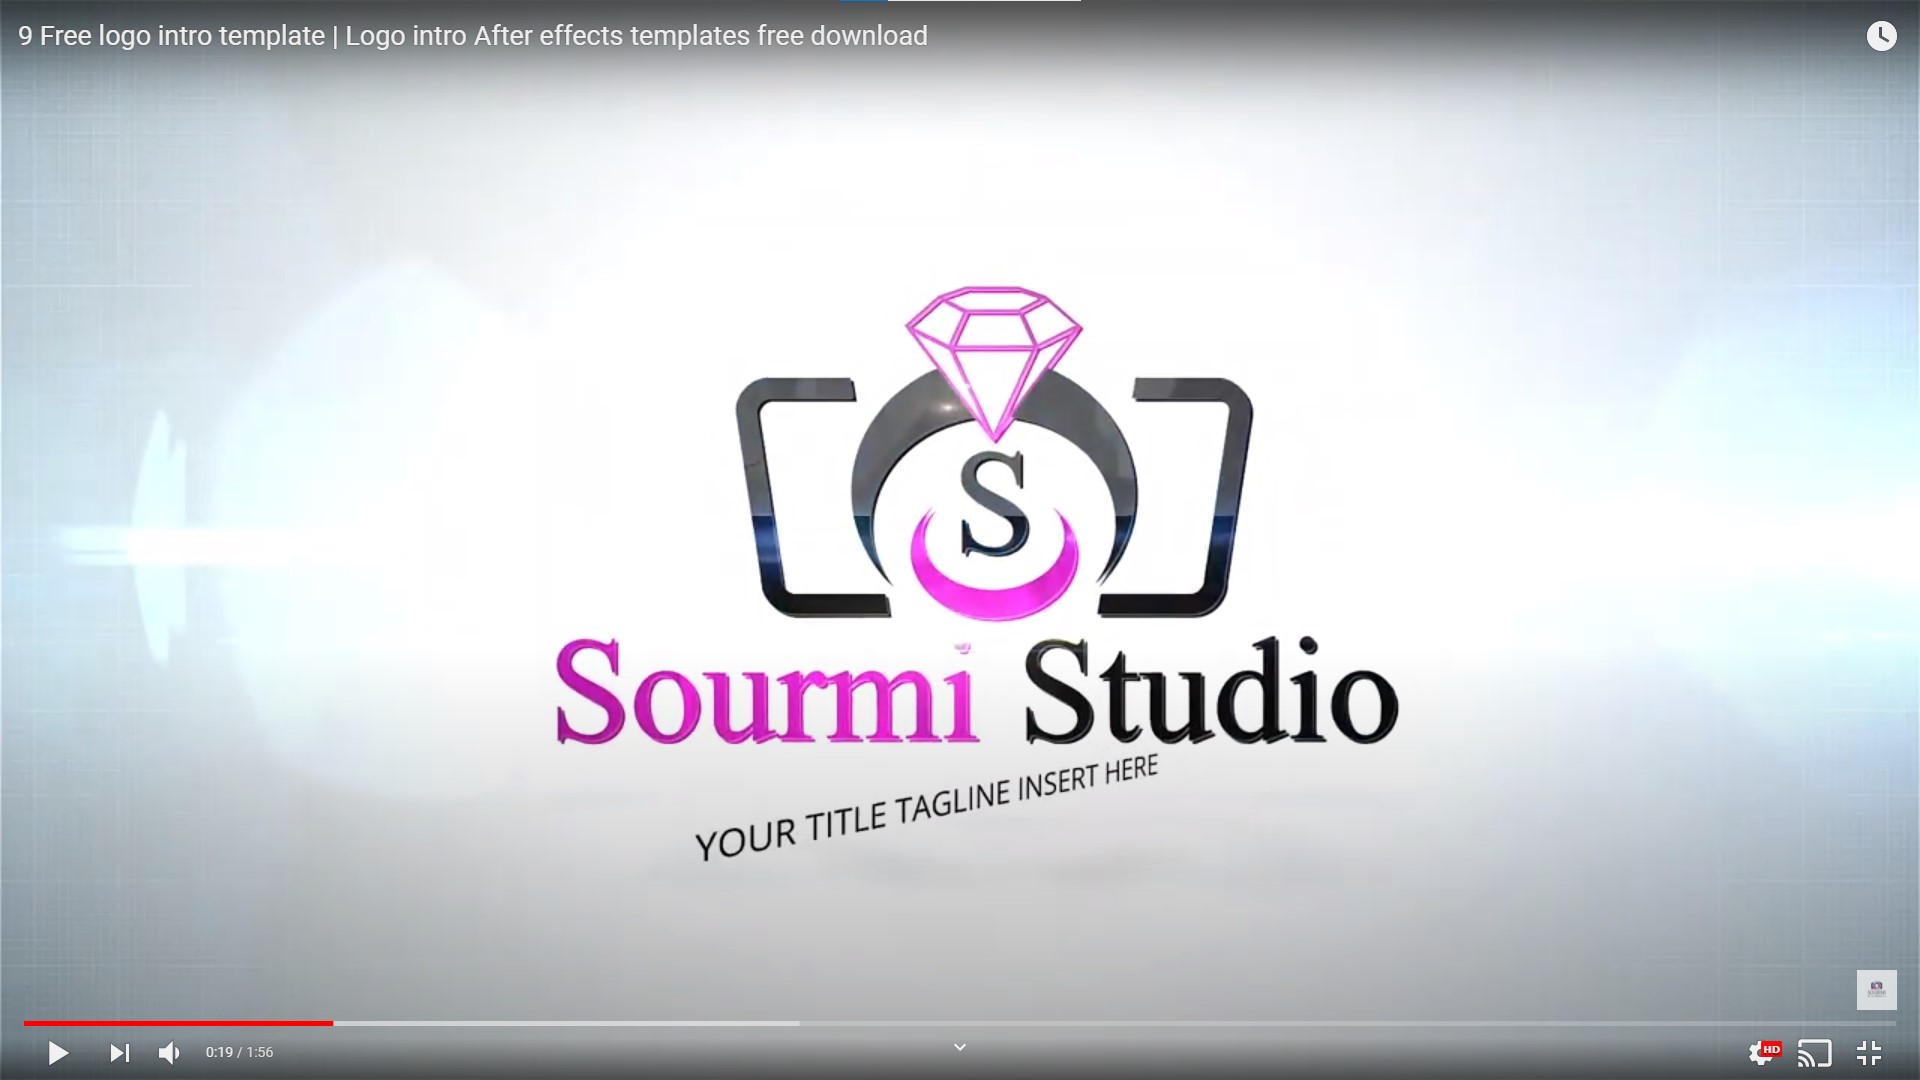 9 Free logo intro template | Logo intro After effects templates free download